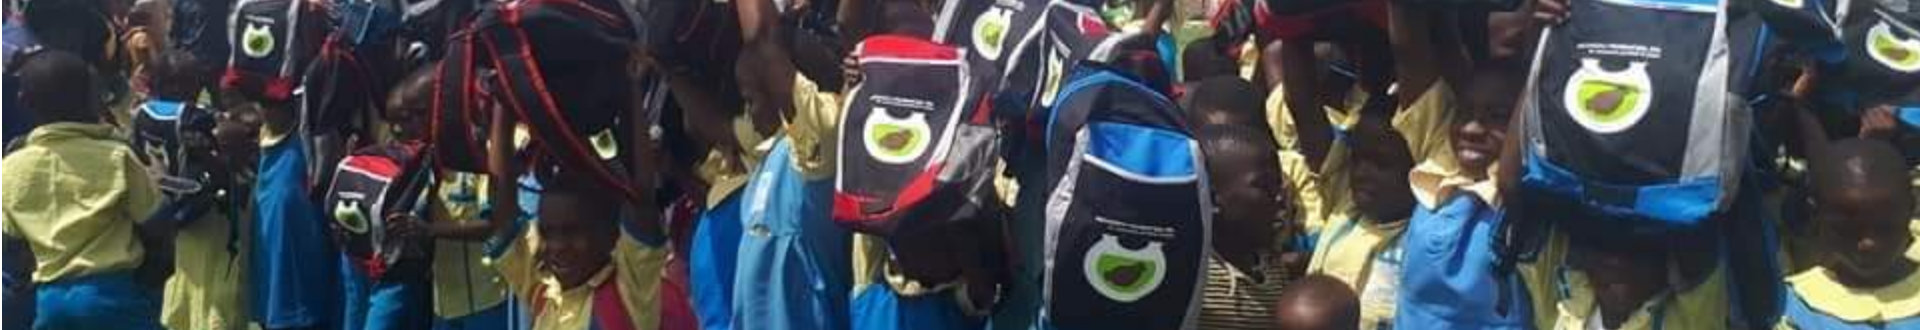 kids holding bags